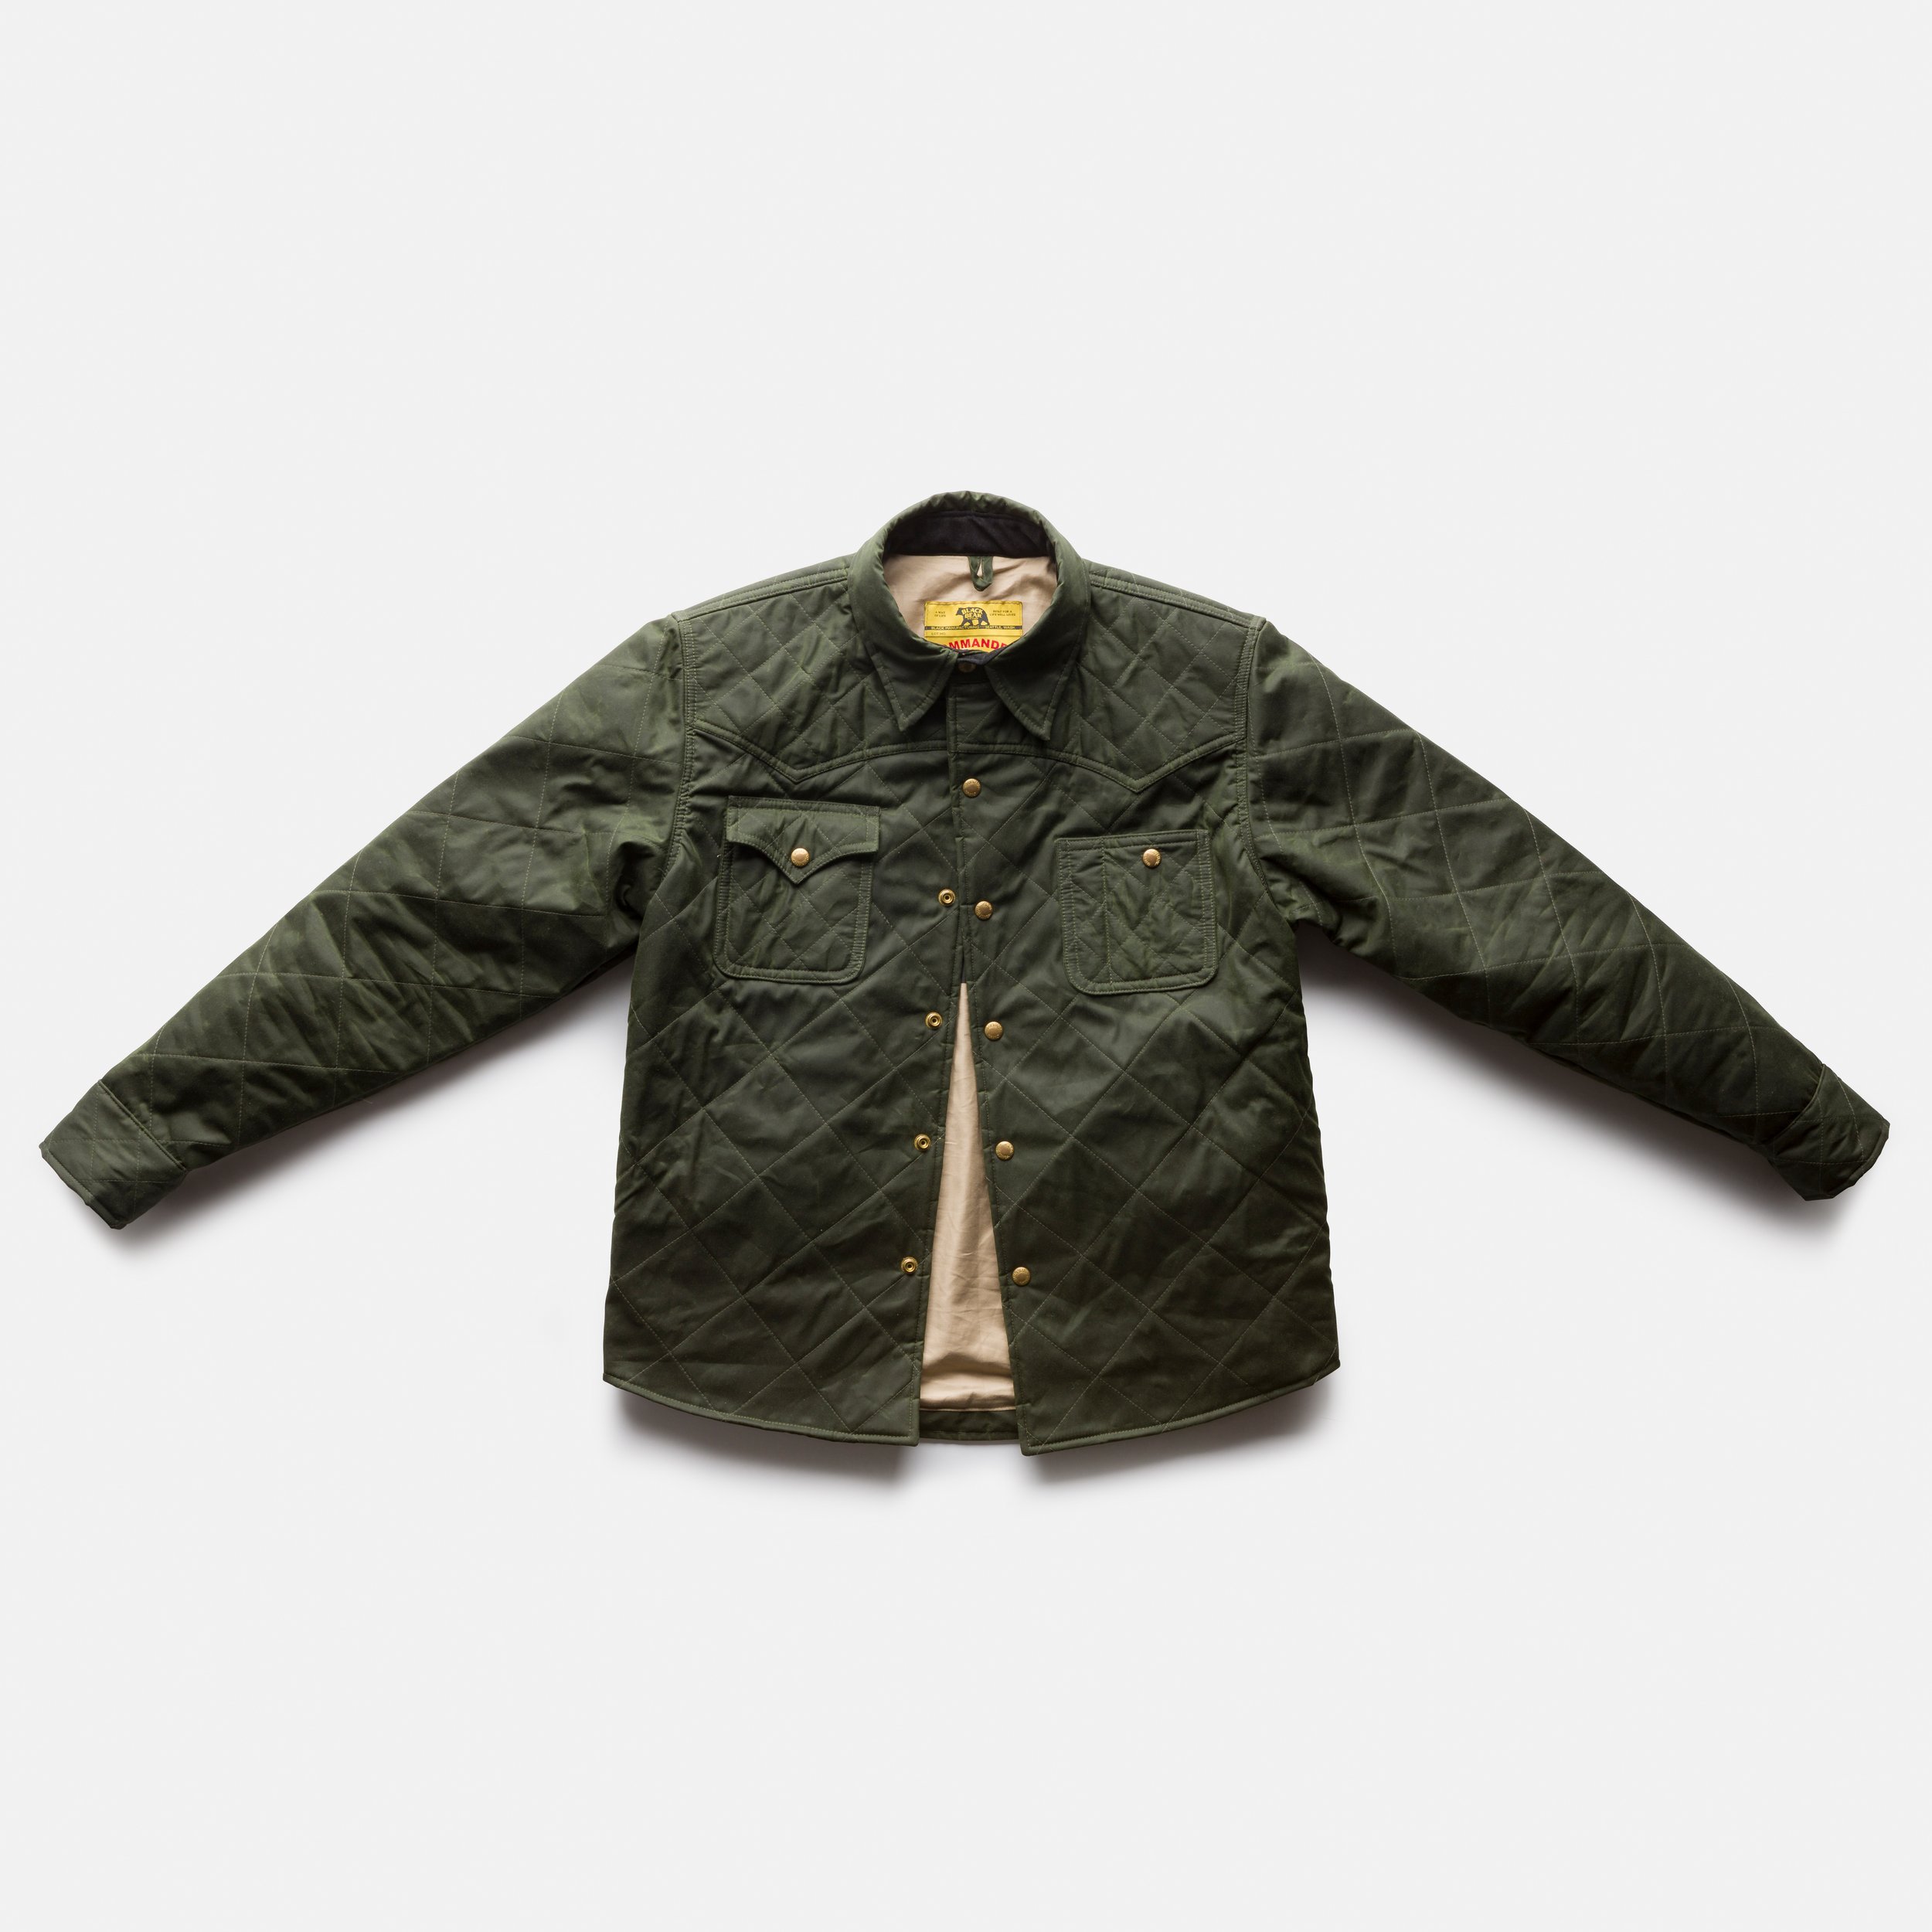 HUNTER Green Wax Canvas... Quilted by Hand - Ultimate Jacket! — Black ...